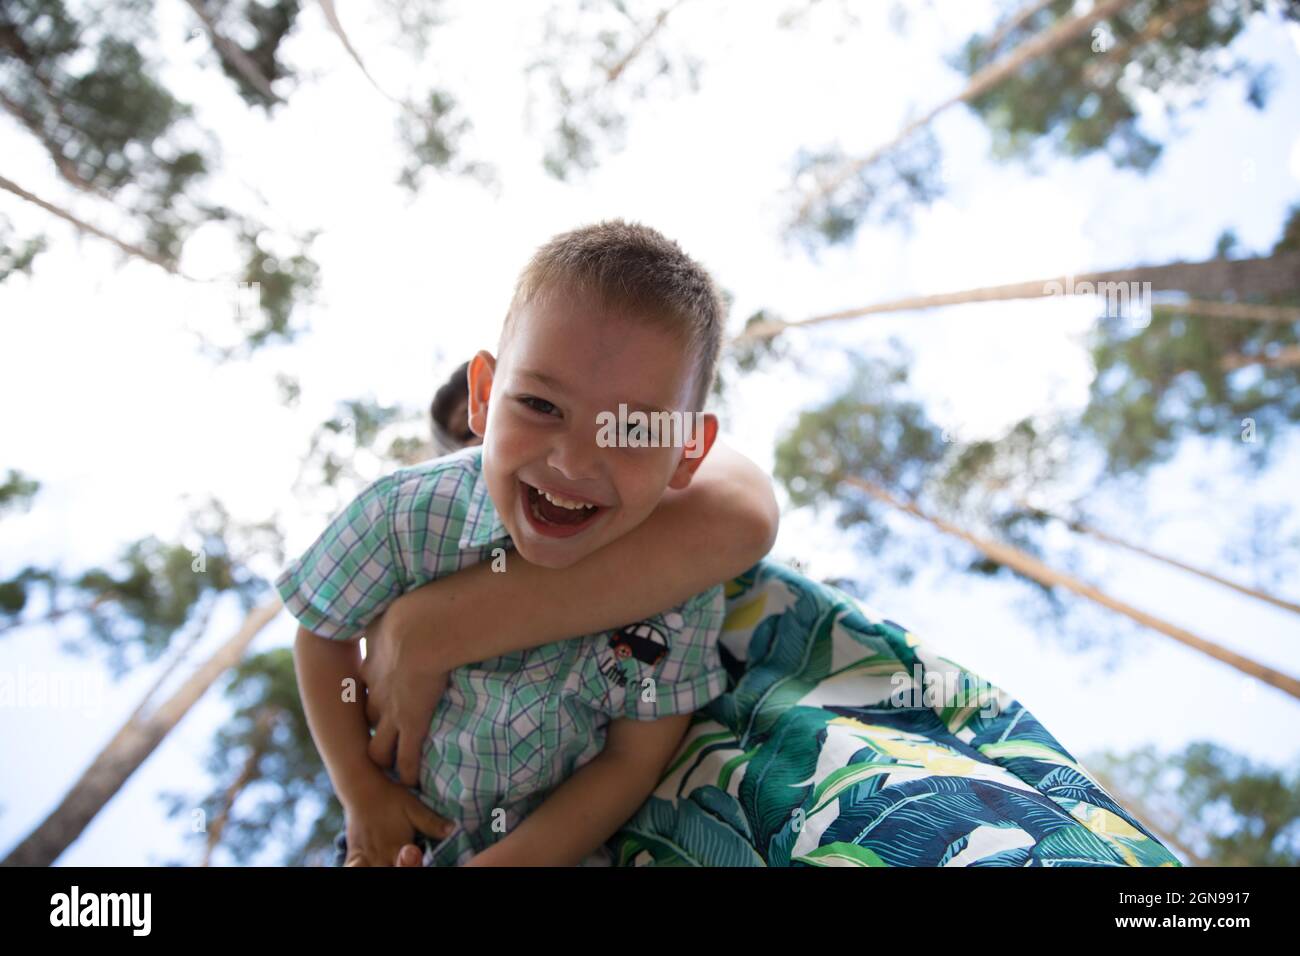 a boy laughs in his mother's arms in the park Stock Photo